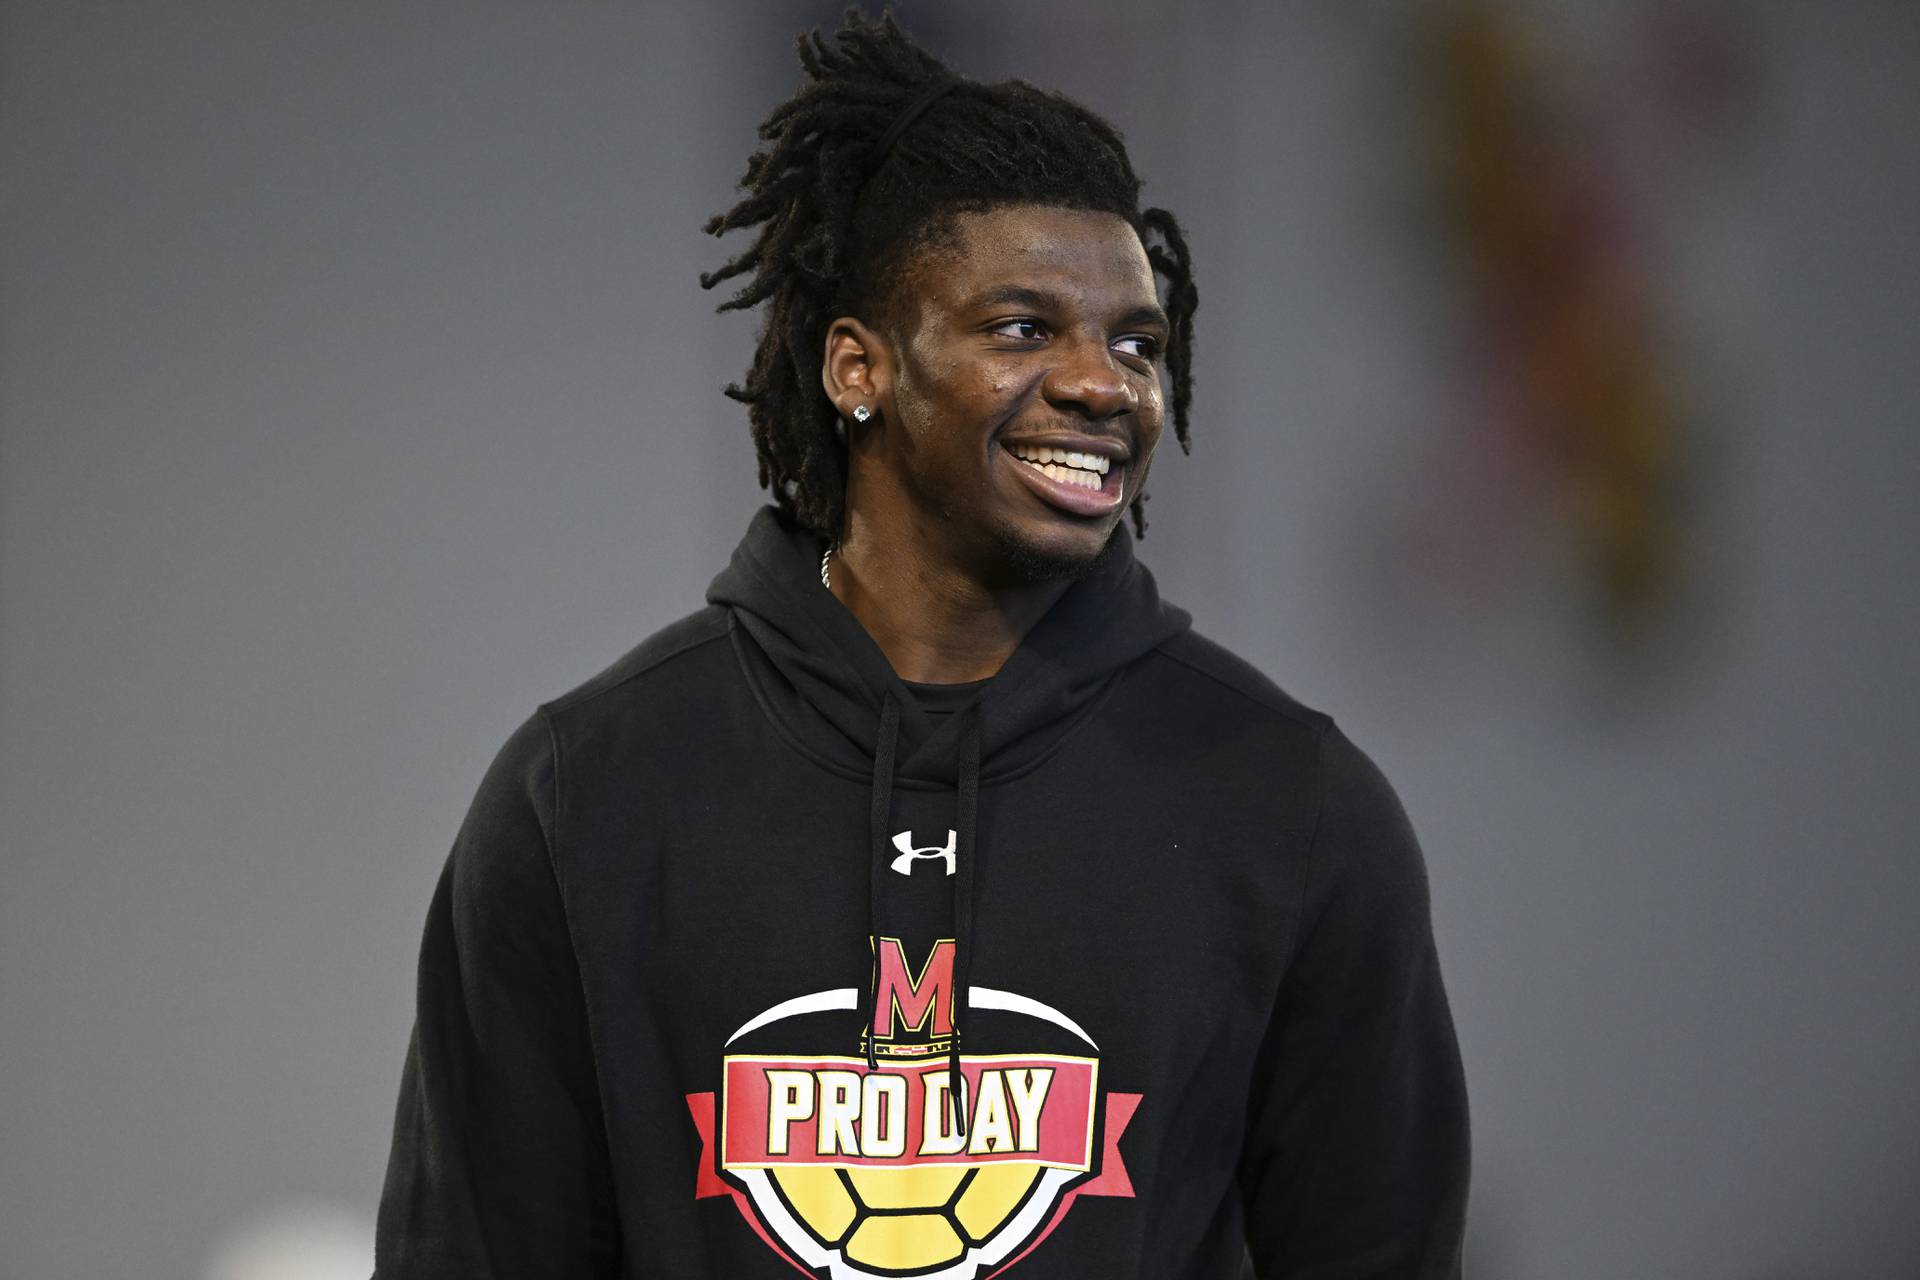 Cornerback Deonte Banks watches from the sidelines during Maryland's football pro day on Wednesday, March 29, 2023, in College Park, Md. Banks did not participate in the workout.